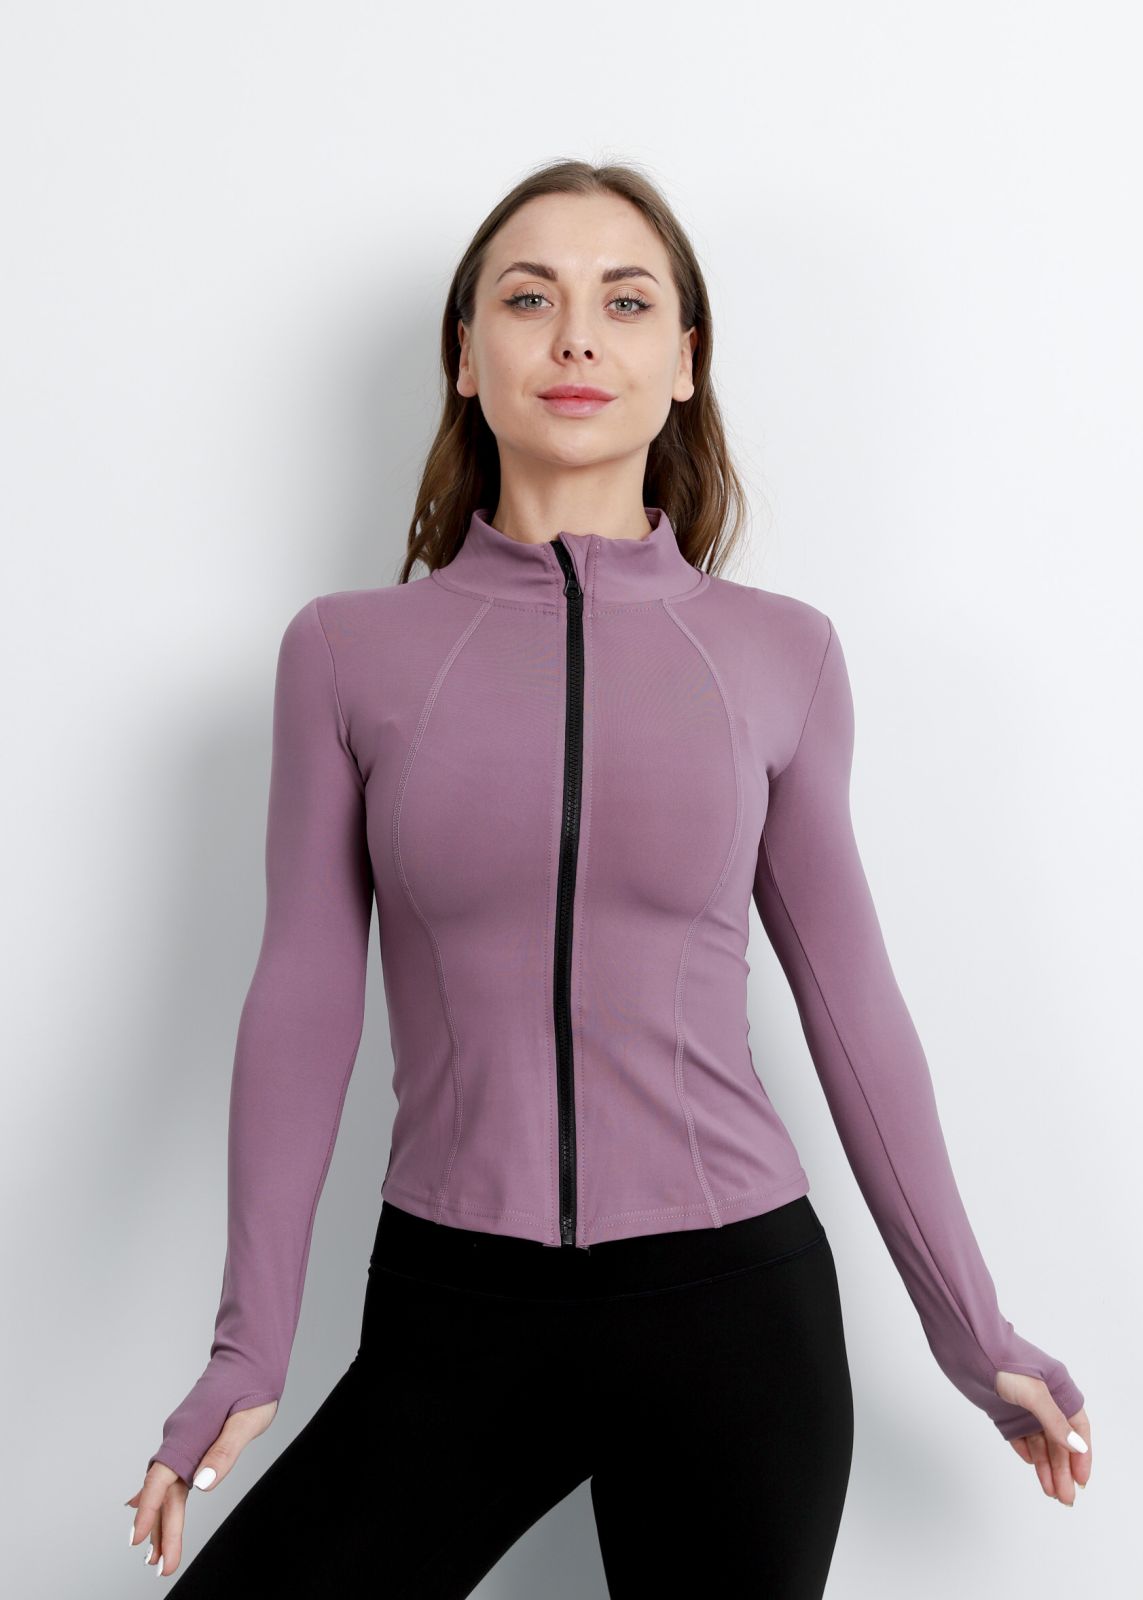 Women's Jackets Activewear, Athletic Shoes & Gear | Nordstrom